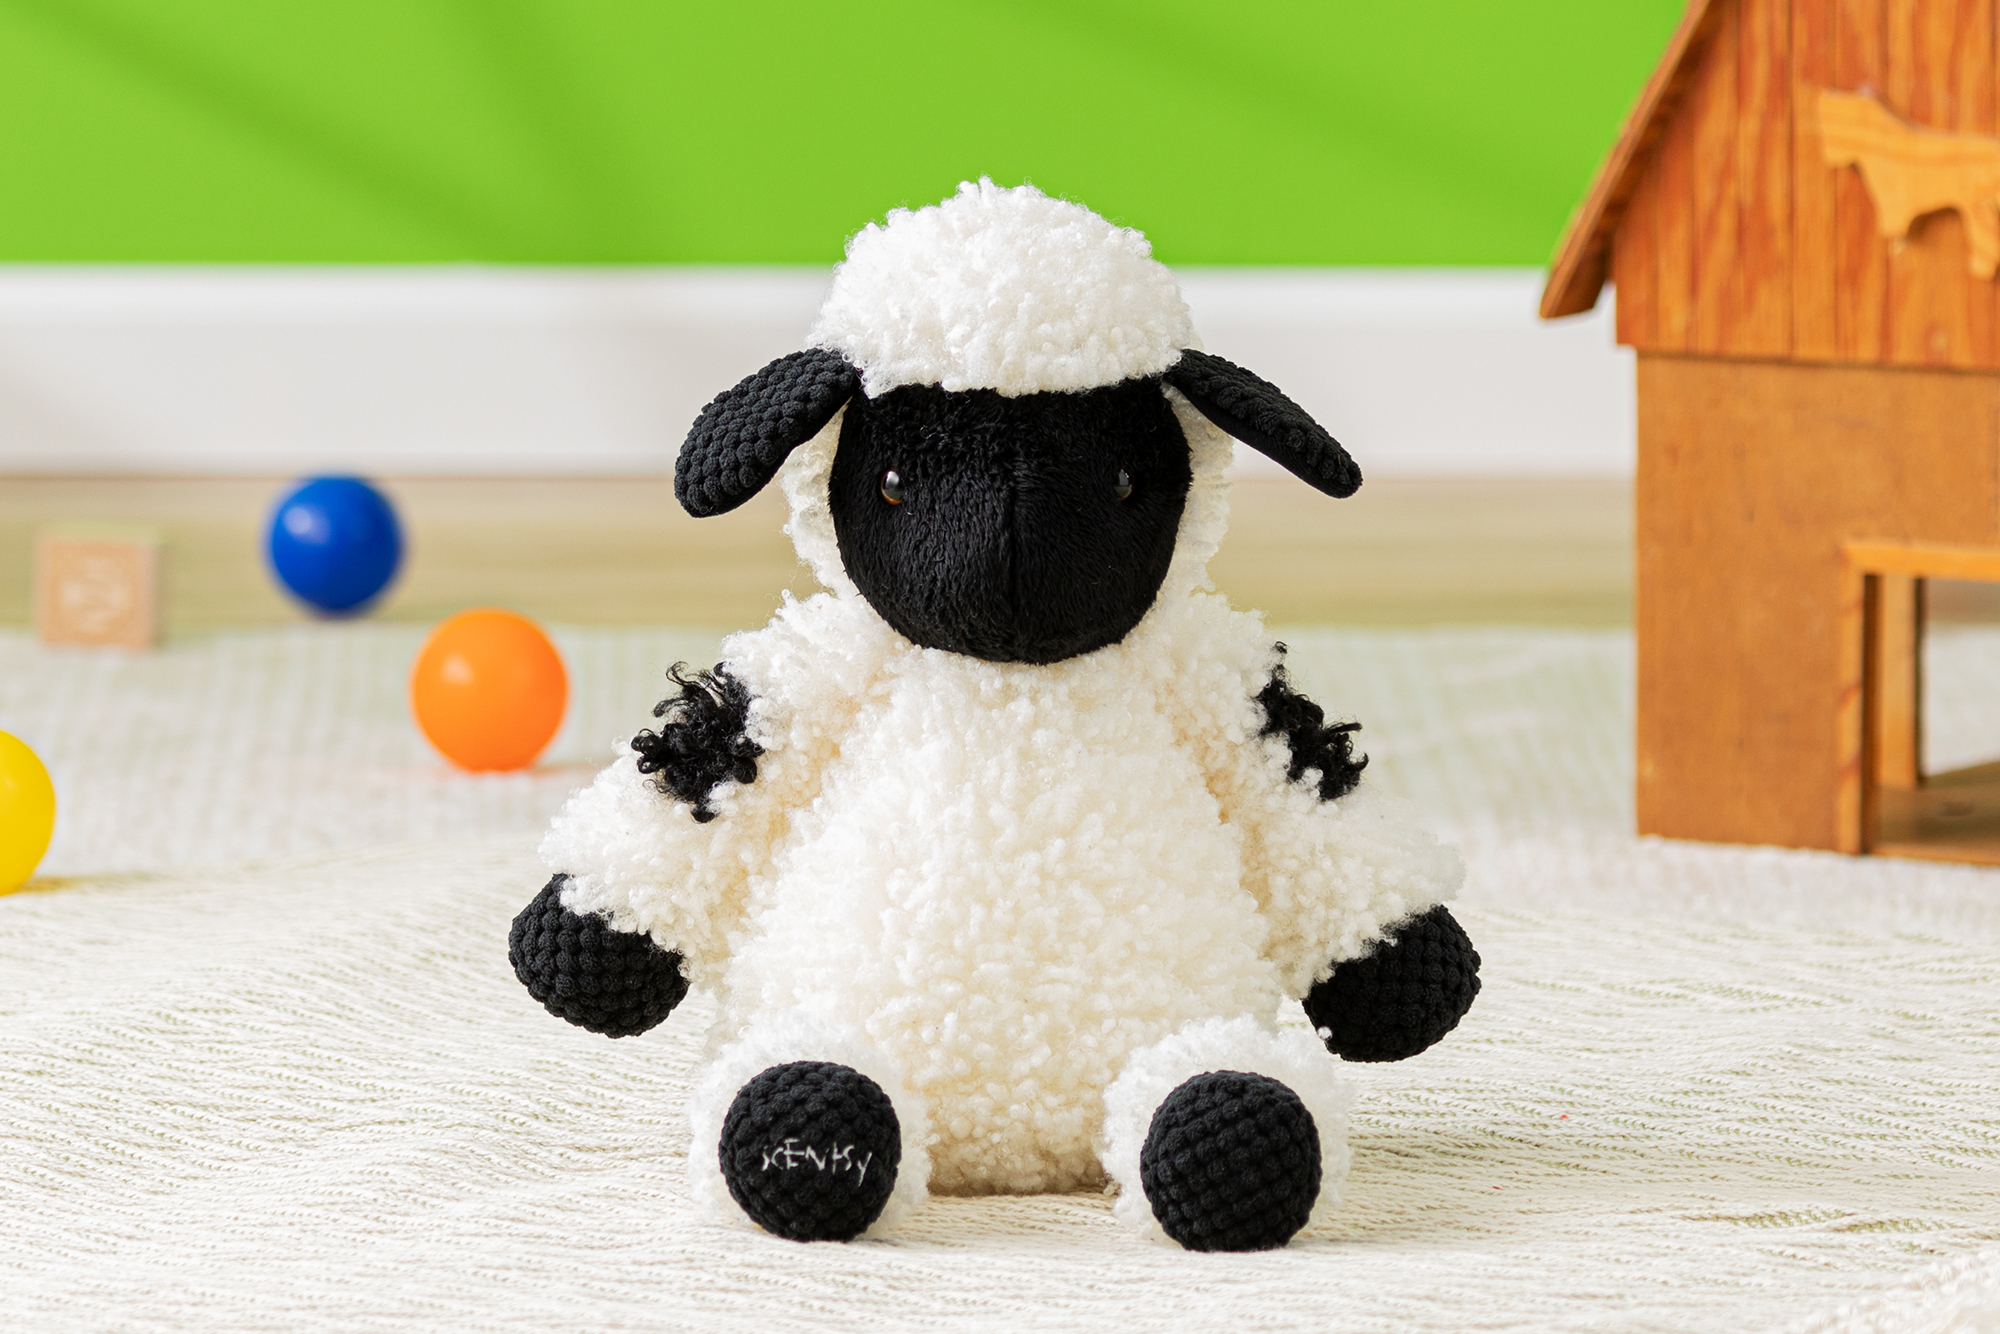 Warm the Heart: Scentsy’s connection with Valais Blacknose sheep